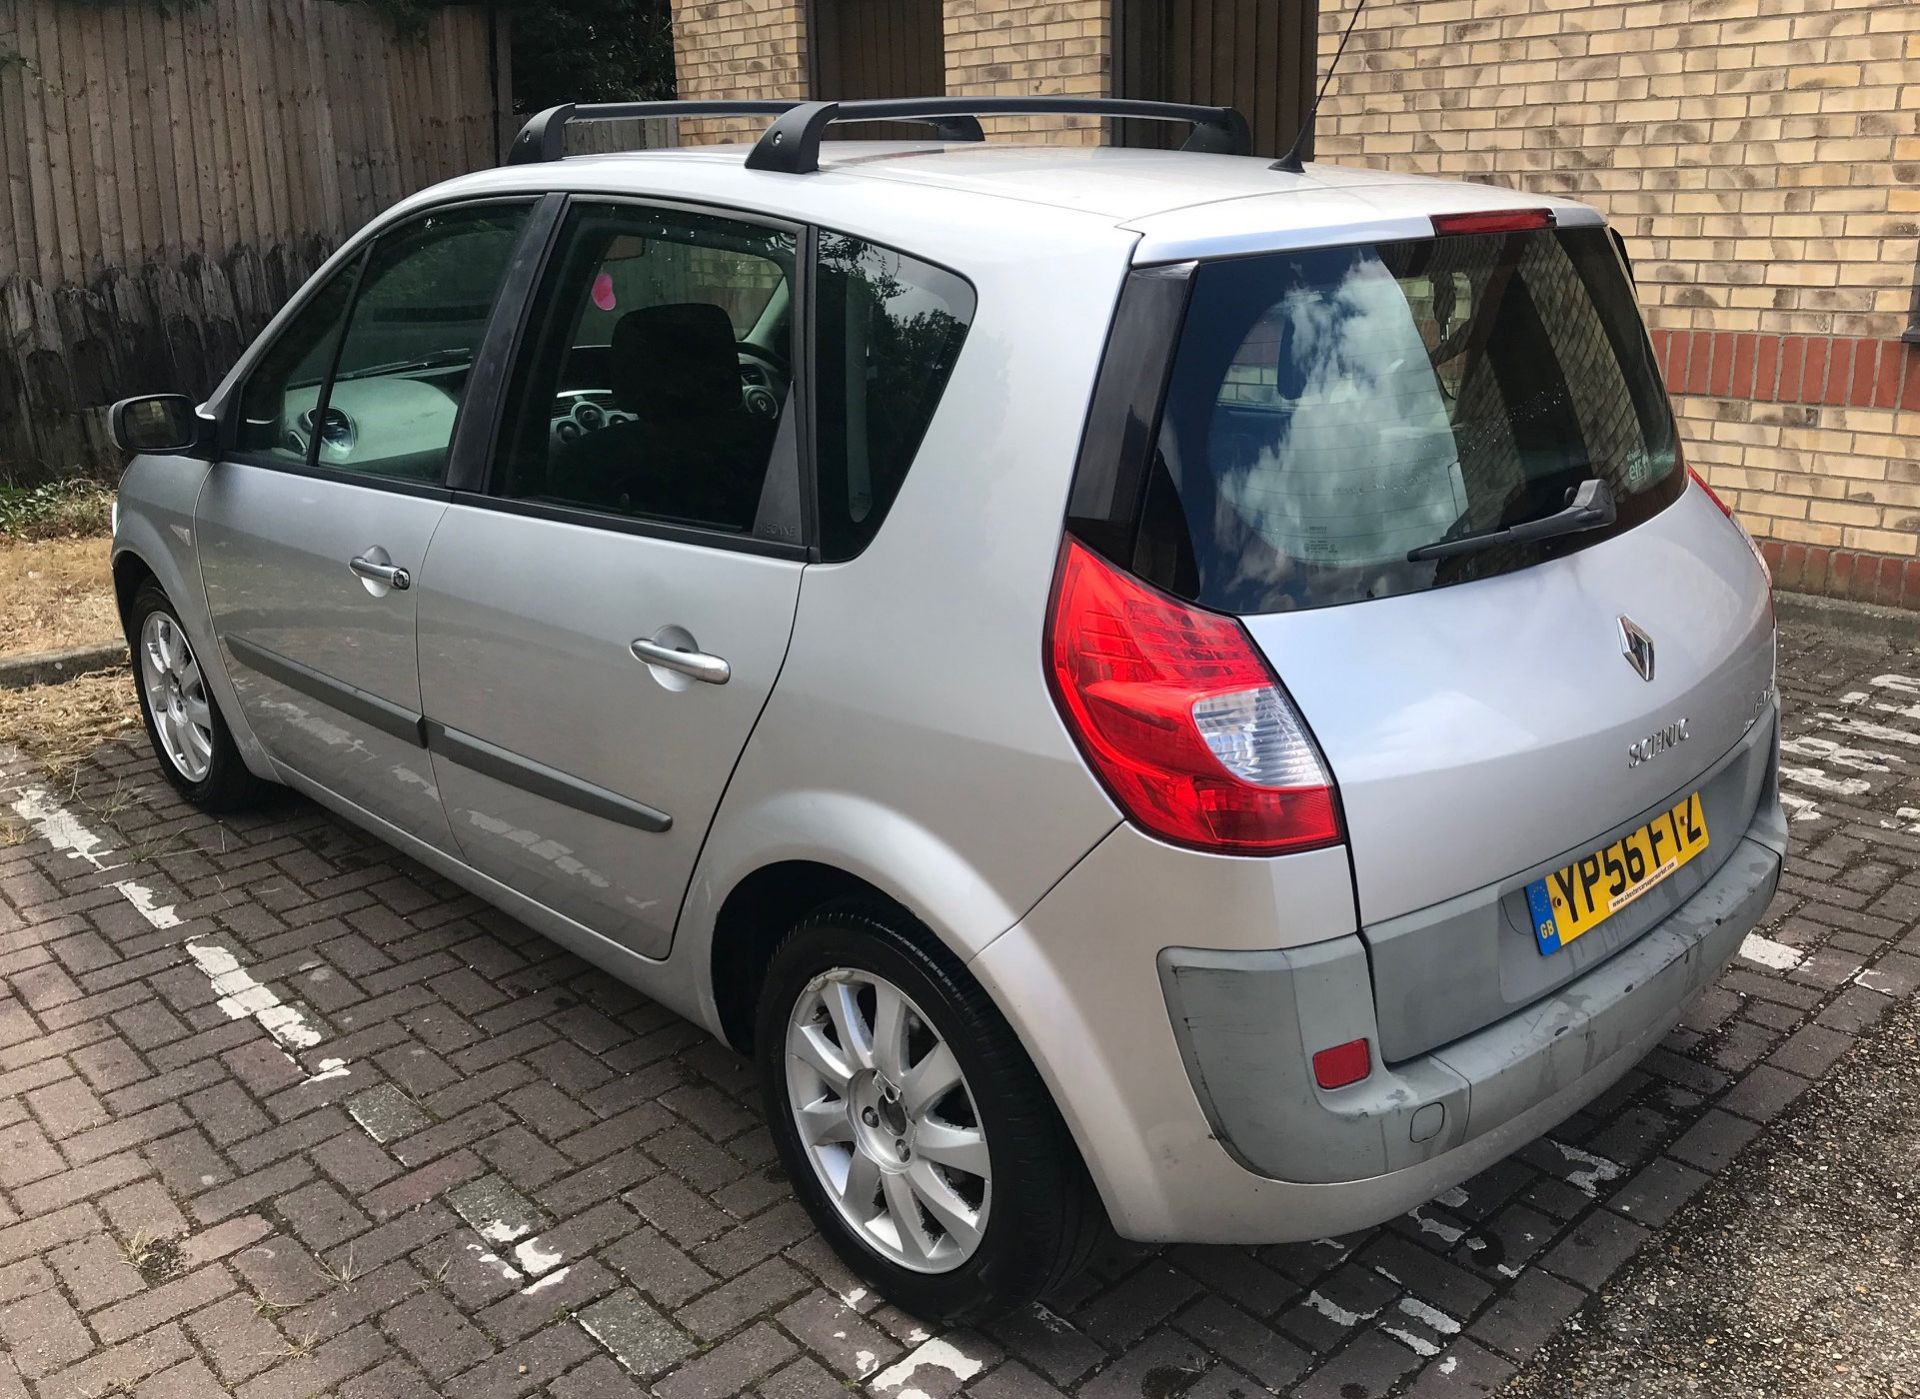 2006 Renault Scenic 1.6 VVT Dynamiq 5 Dr MPV - CL505 - NO VAT ON THE HAMMER - Location: Corby, Nort - Image 11 of 12